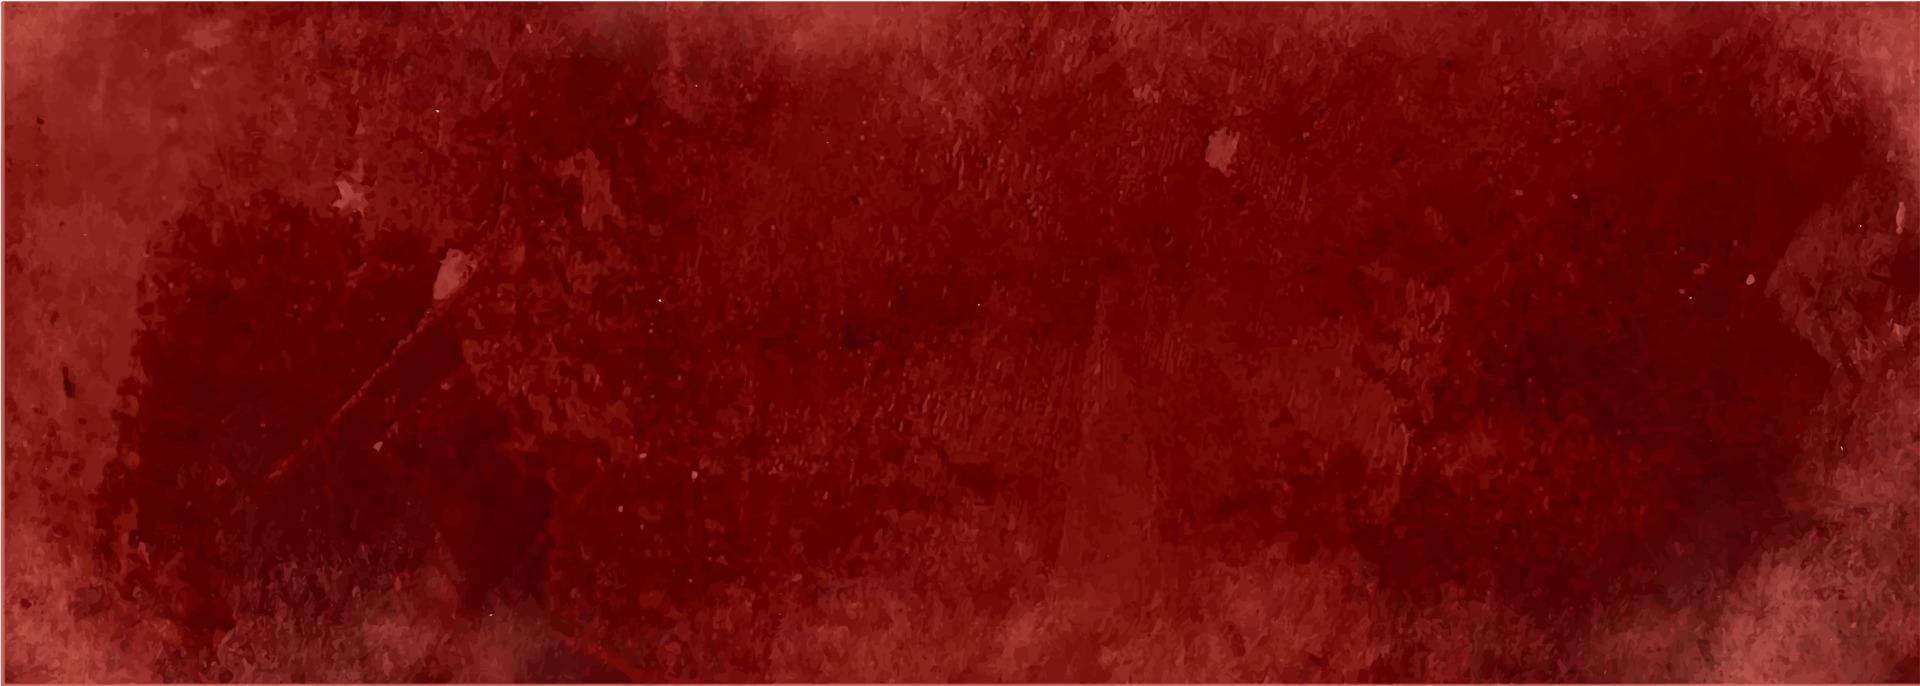 Abstract Red Grunge Texture Background vector